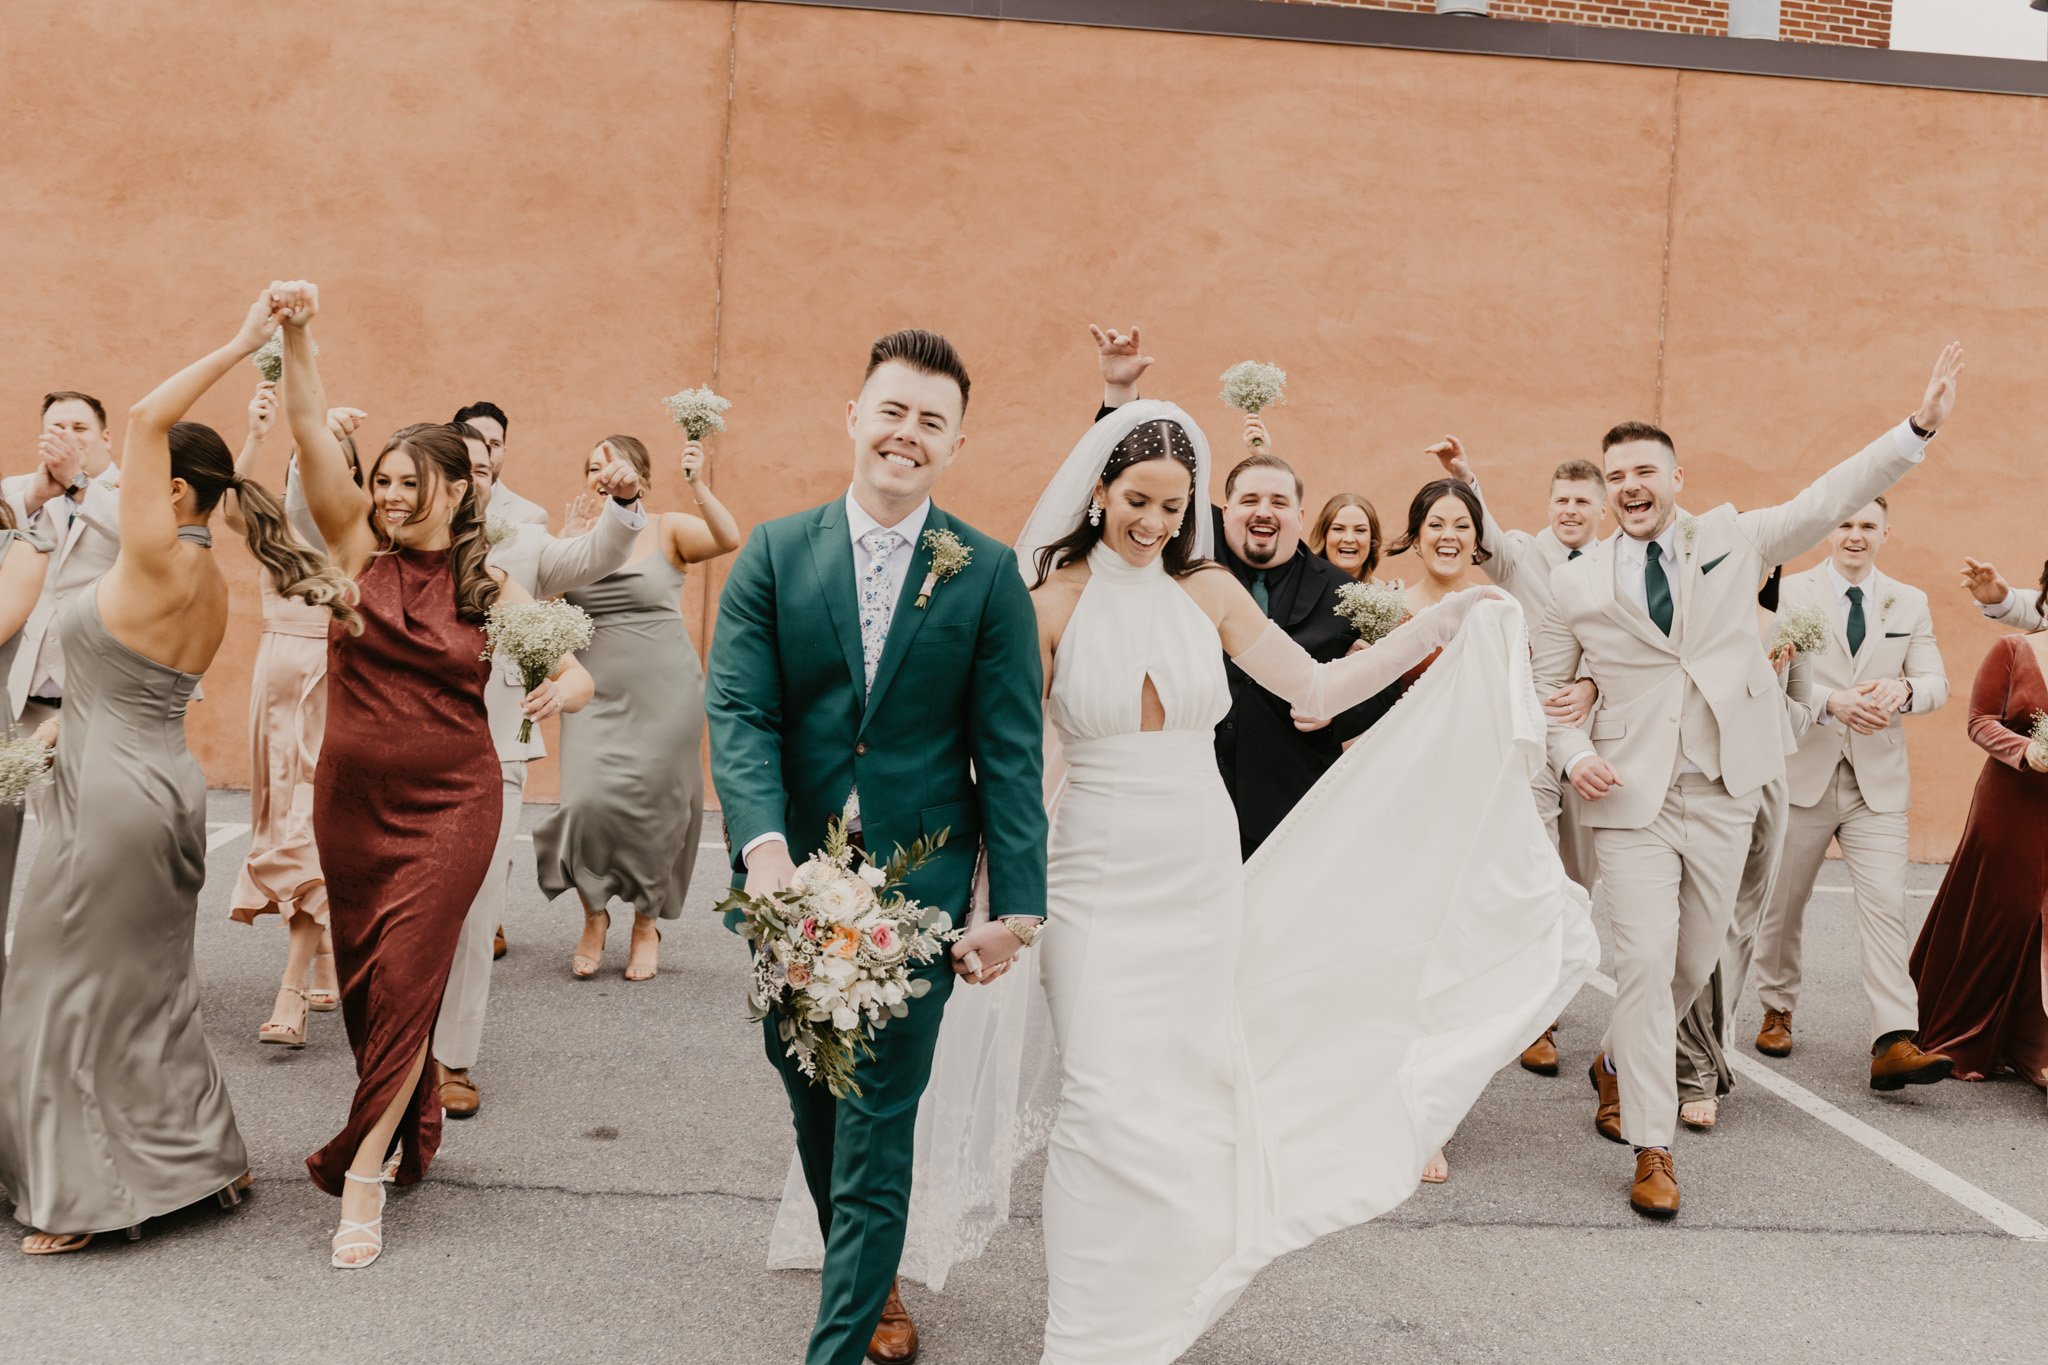 Jen and Tyler's Spring Wedding at The Cork Factory Hotel